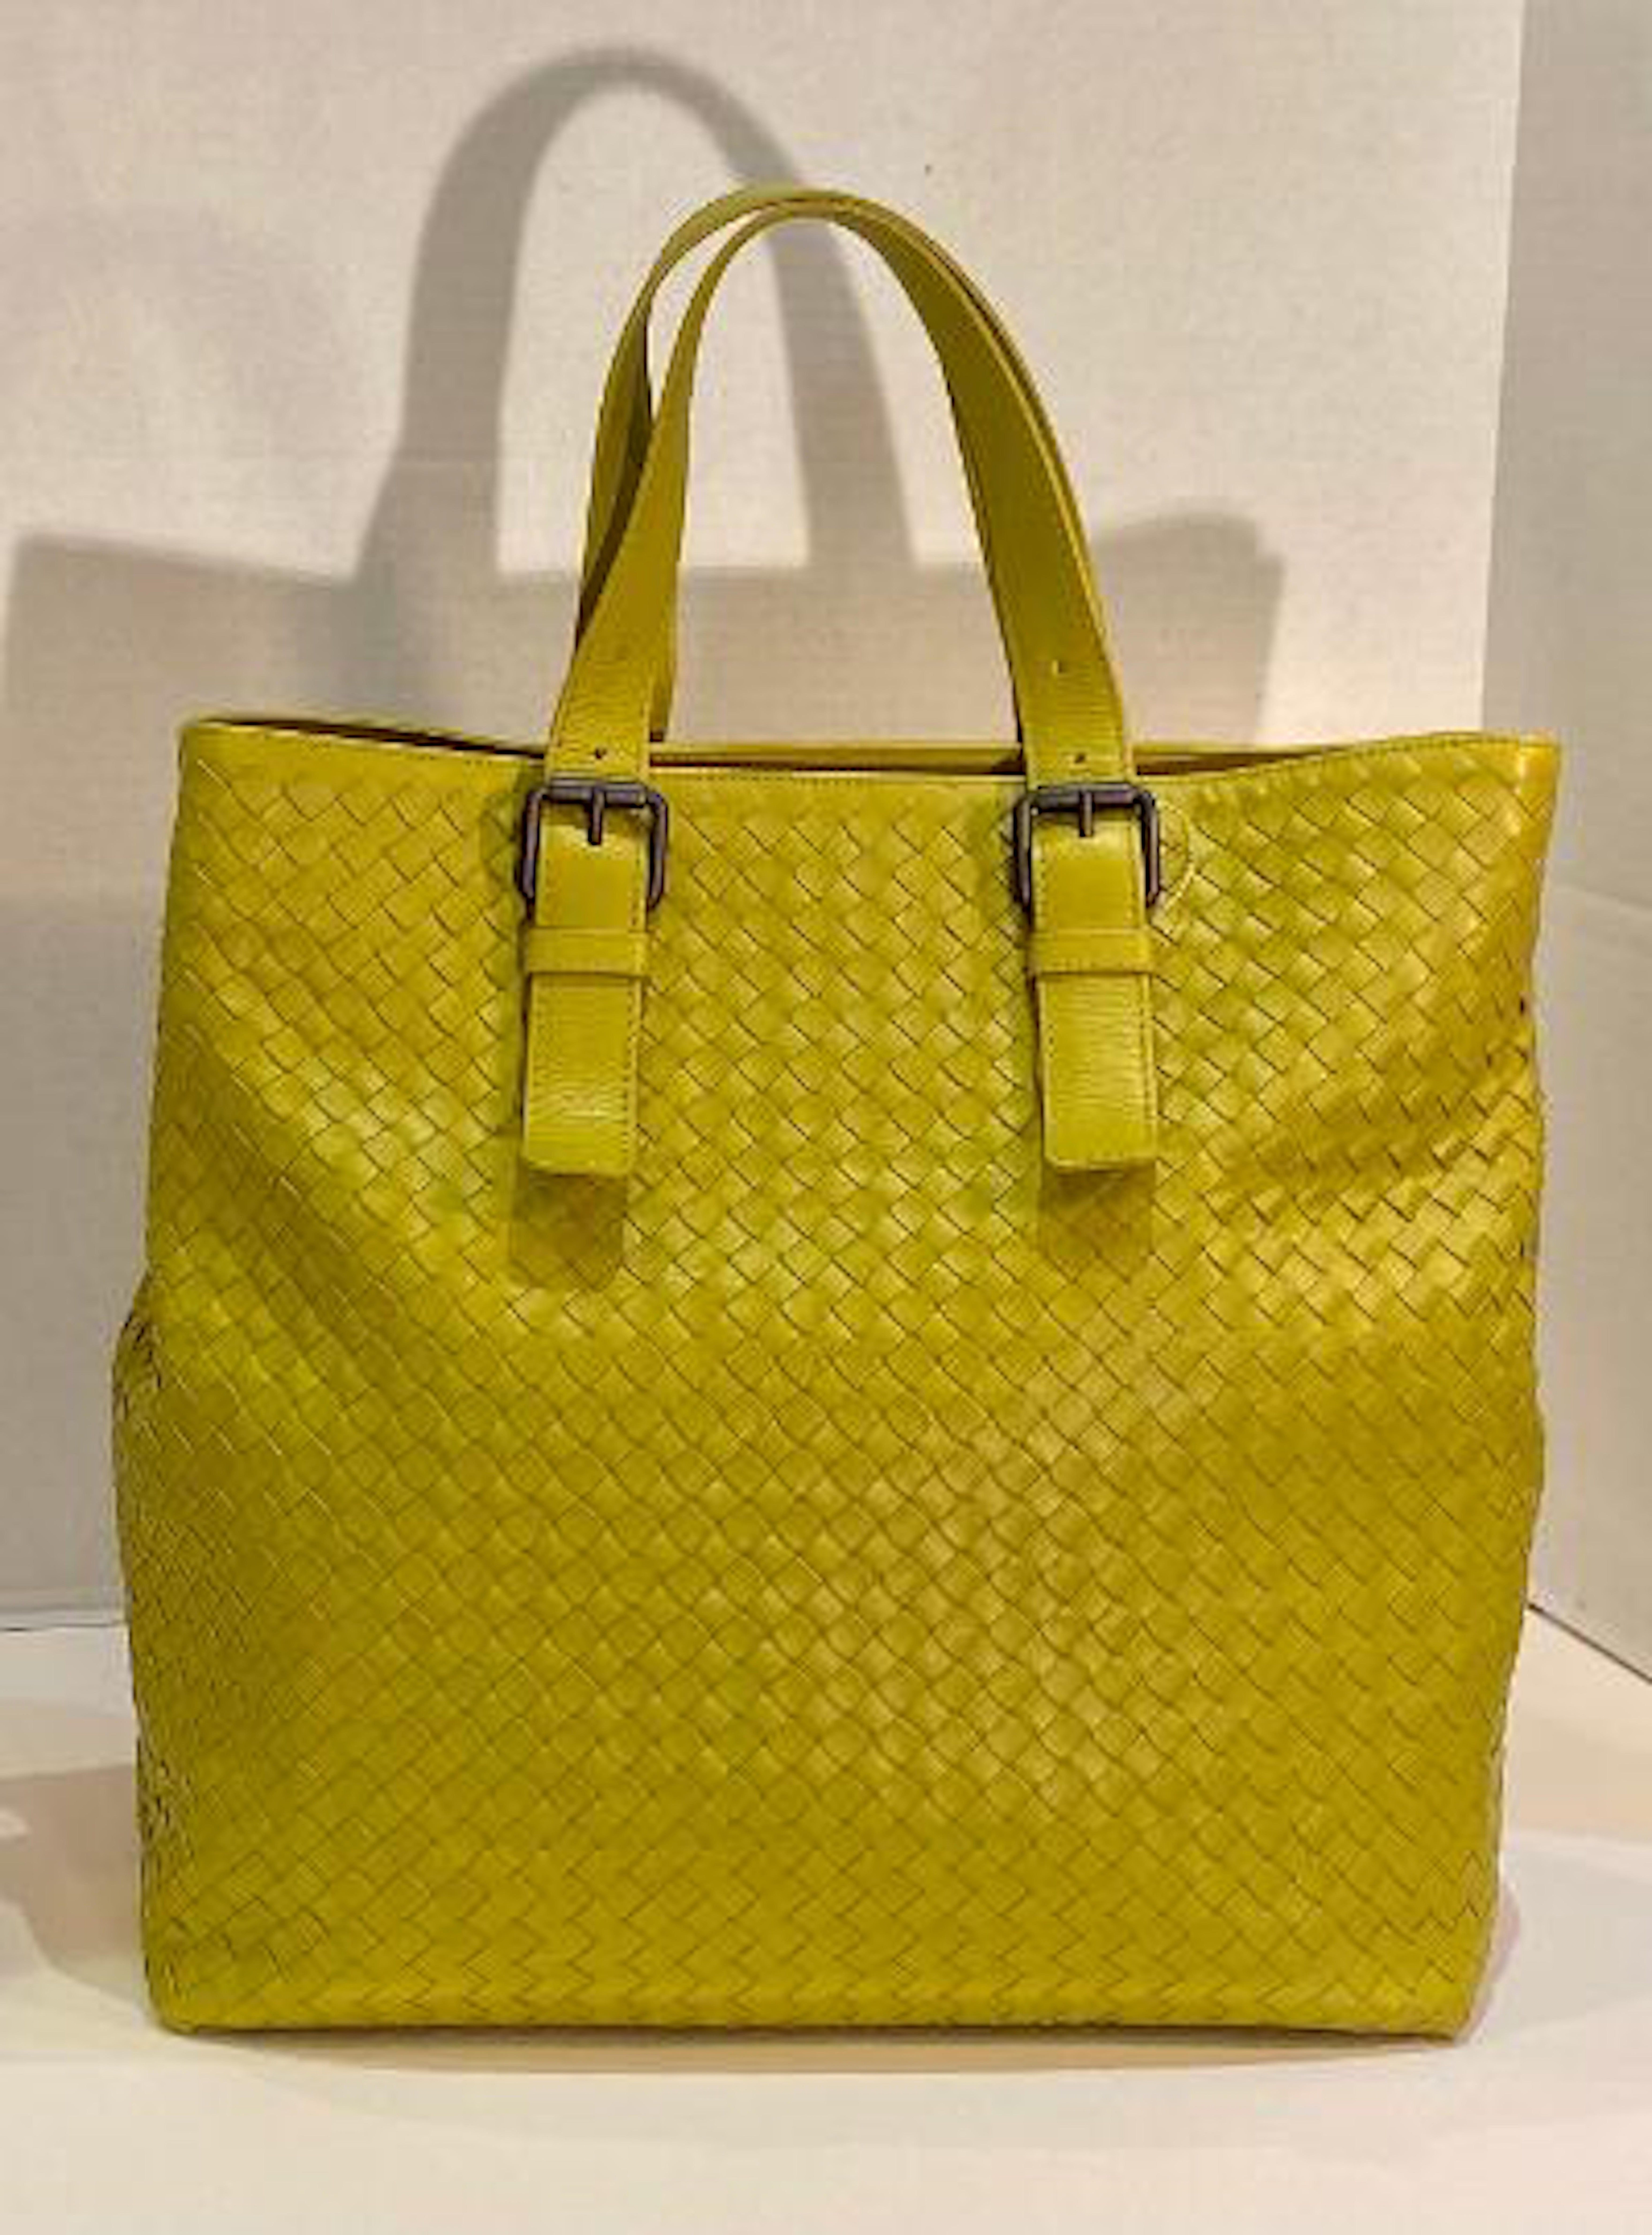 Mint condition, striking chartreuse green handmade BOTTEGA VENETA large tote bag purse in the signature intrecciato woven leather. This beautiful bag is seamlessly put together - a true piece of the finest Italian made craftsmanship.  Bag features